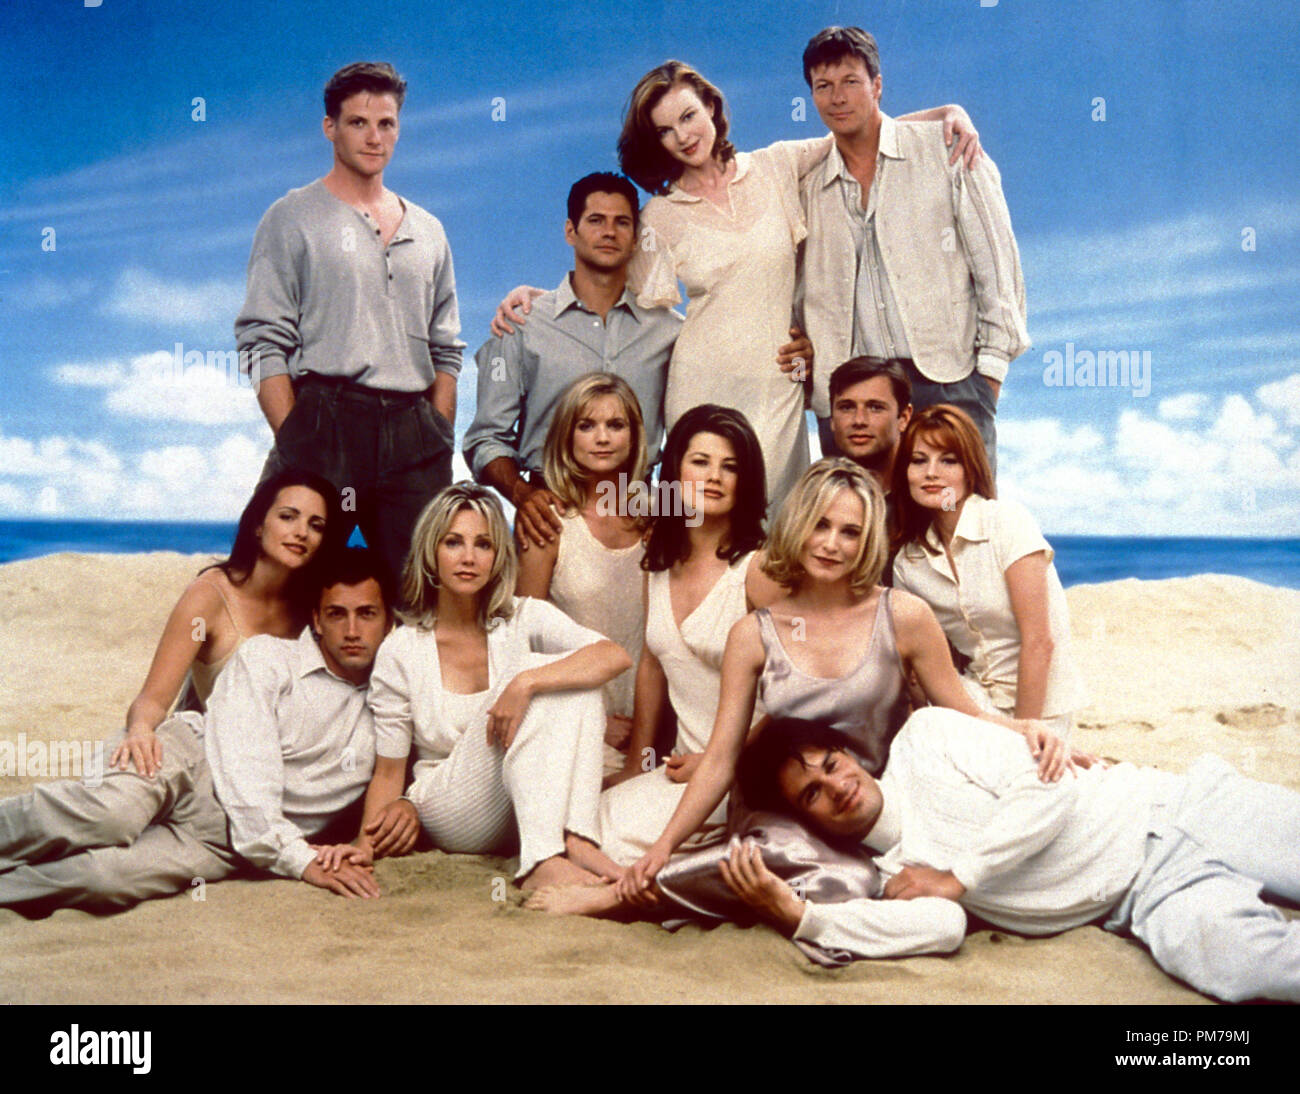 Film Still from 'Melrose Place' Daphne Zuniga, Courtney Thorne-Smith, Heather Locklear, Andrew Shue, Kristin Davis, Doug Savant, Thomas Calabro, Marcia Cross, Jack Wagner, Grant Show, Laura Leighton, Patrick Muldoon, 1996. Photo Credit: Mathew Rolston  File Reference # 31042392THA  For Editorial Use Only - All Rights Reserved Stock Photo